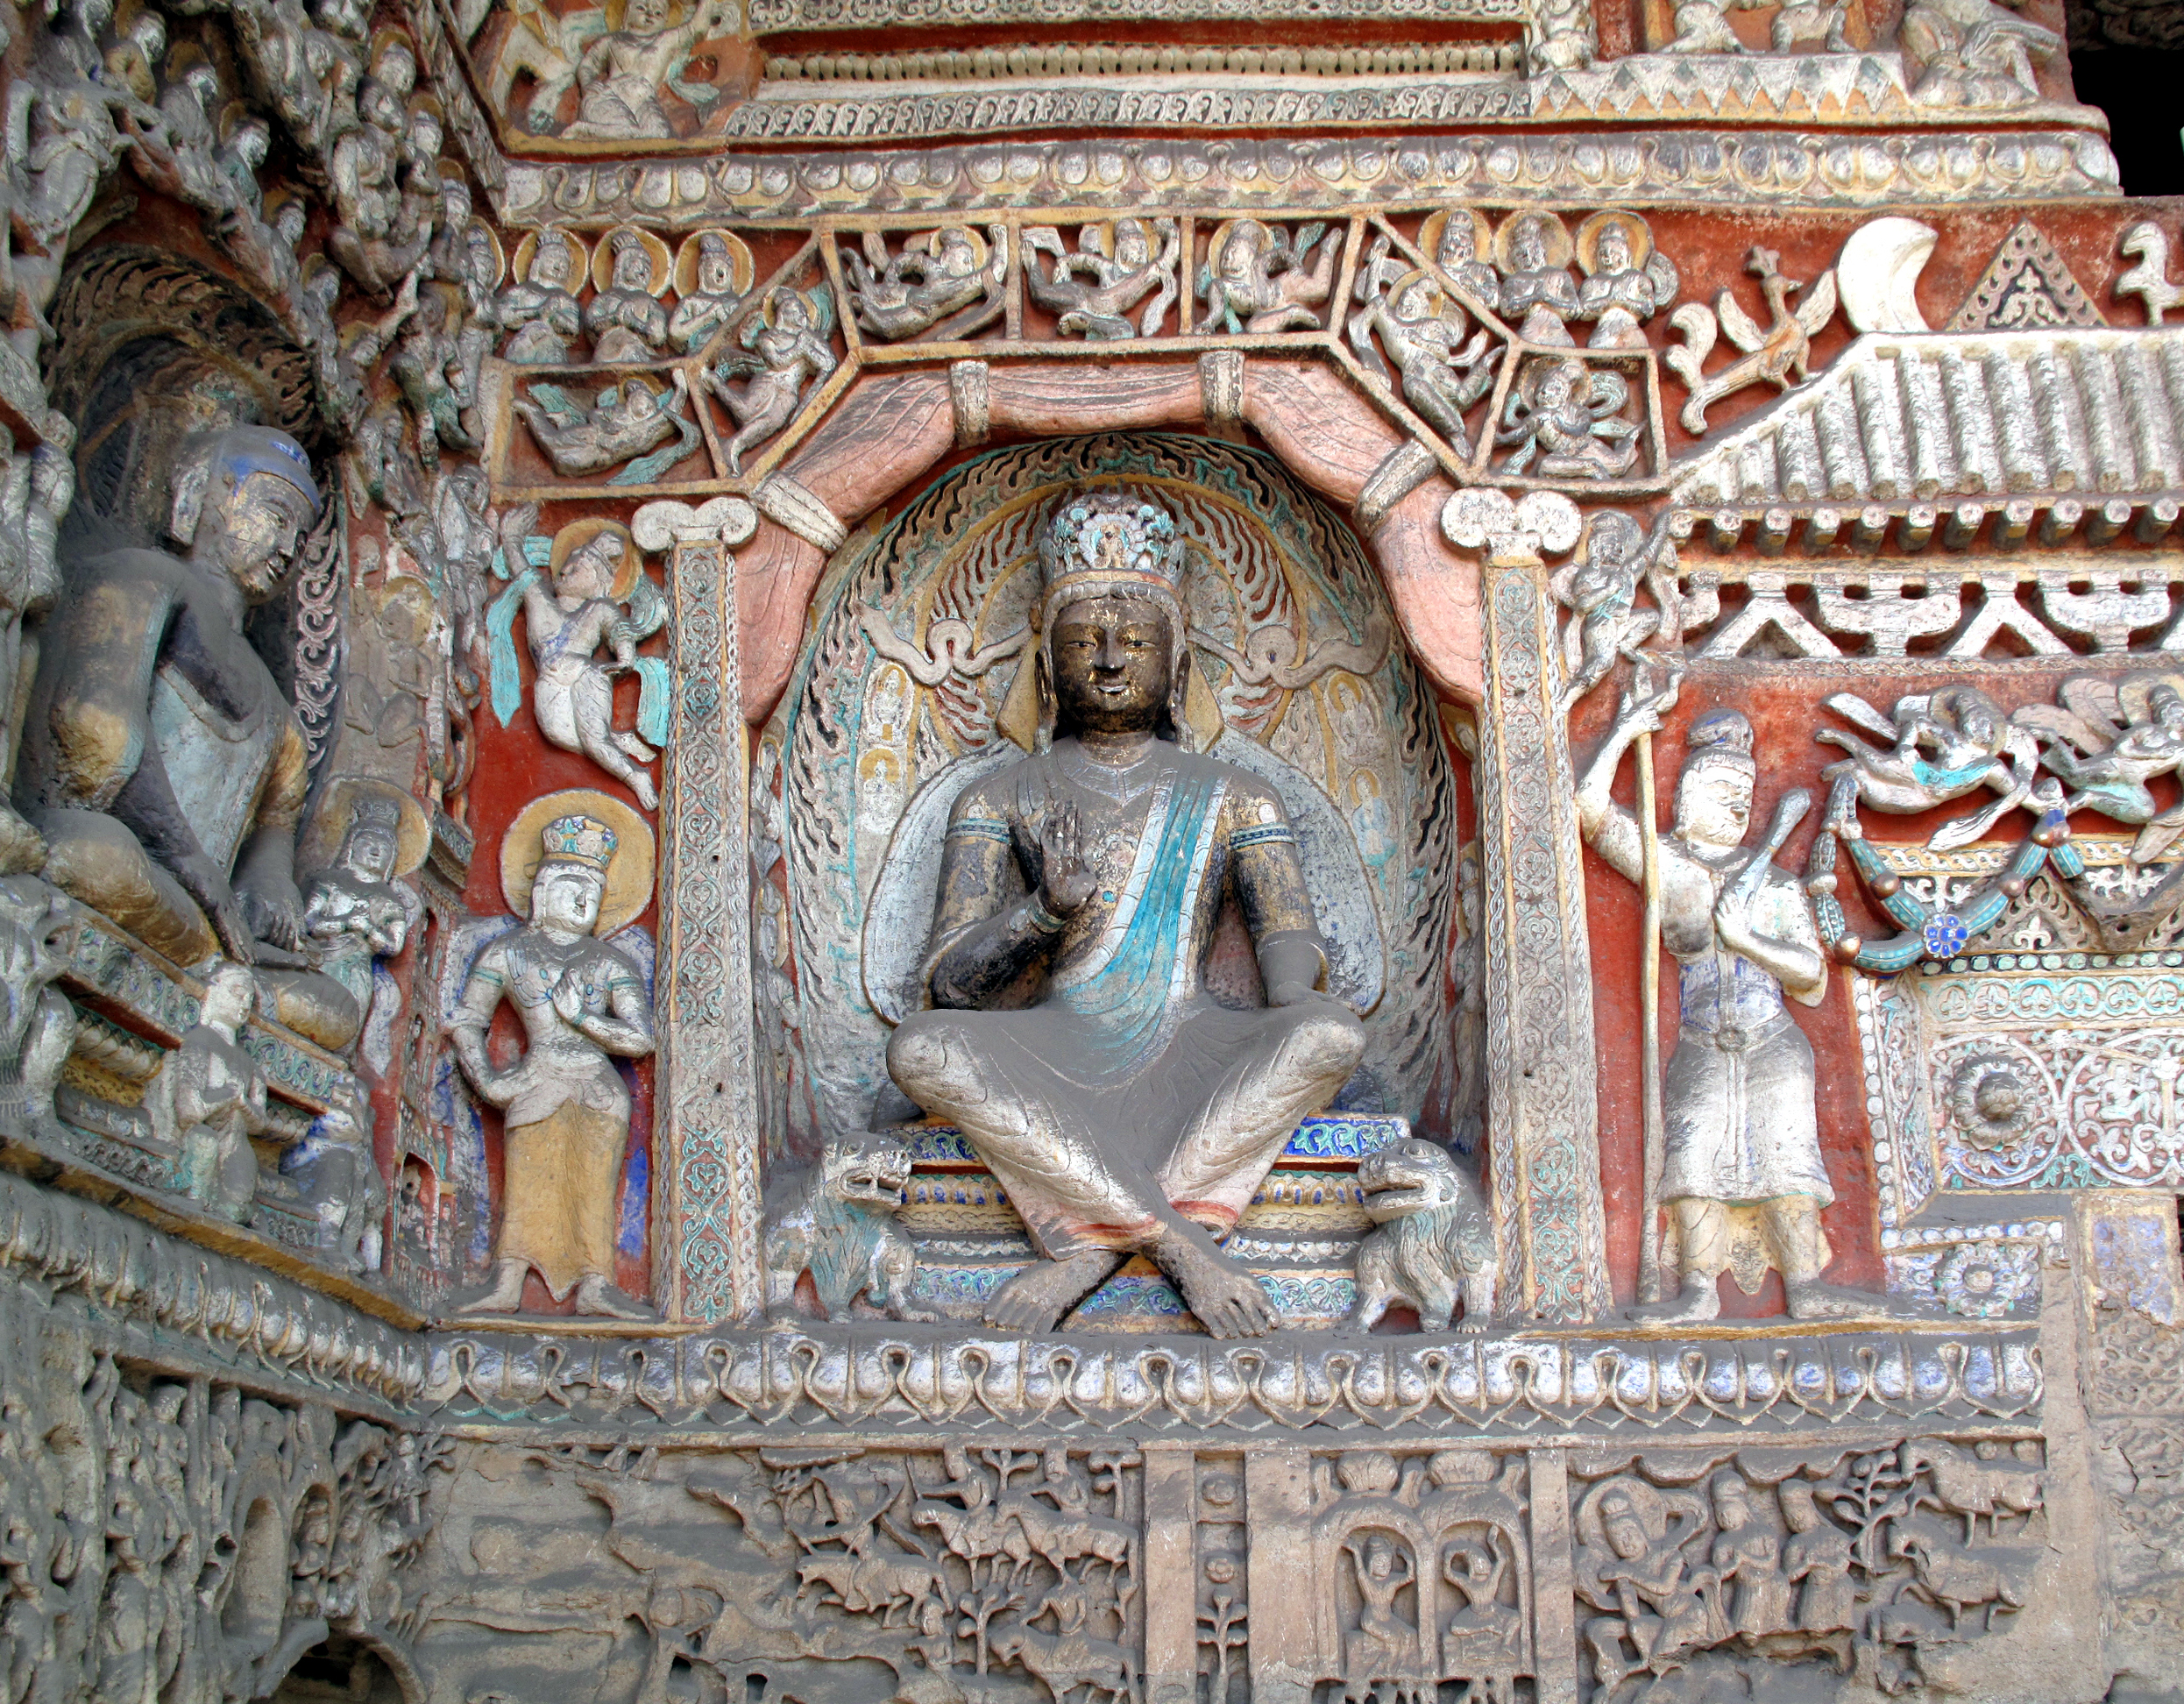 The cross-legged Bodhisattva Maitreya is shown here, on the east wall of the antechamber of Cave 9, phase II, after 650. Yungang Grottoes, Datong, China (photo: G41rn8, CC BY-SA 4.0)